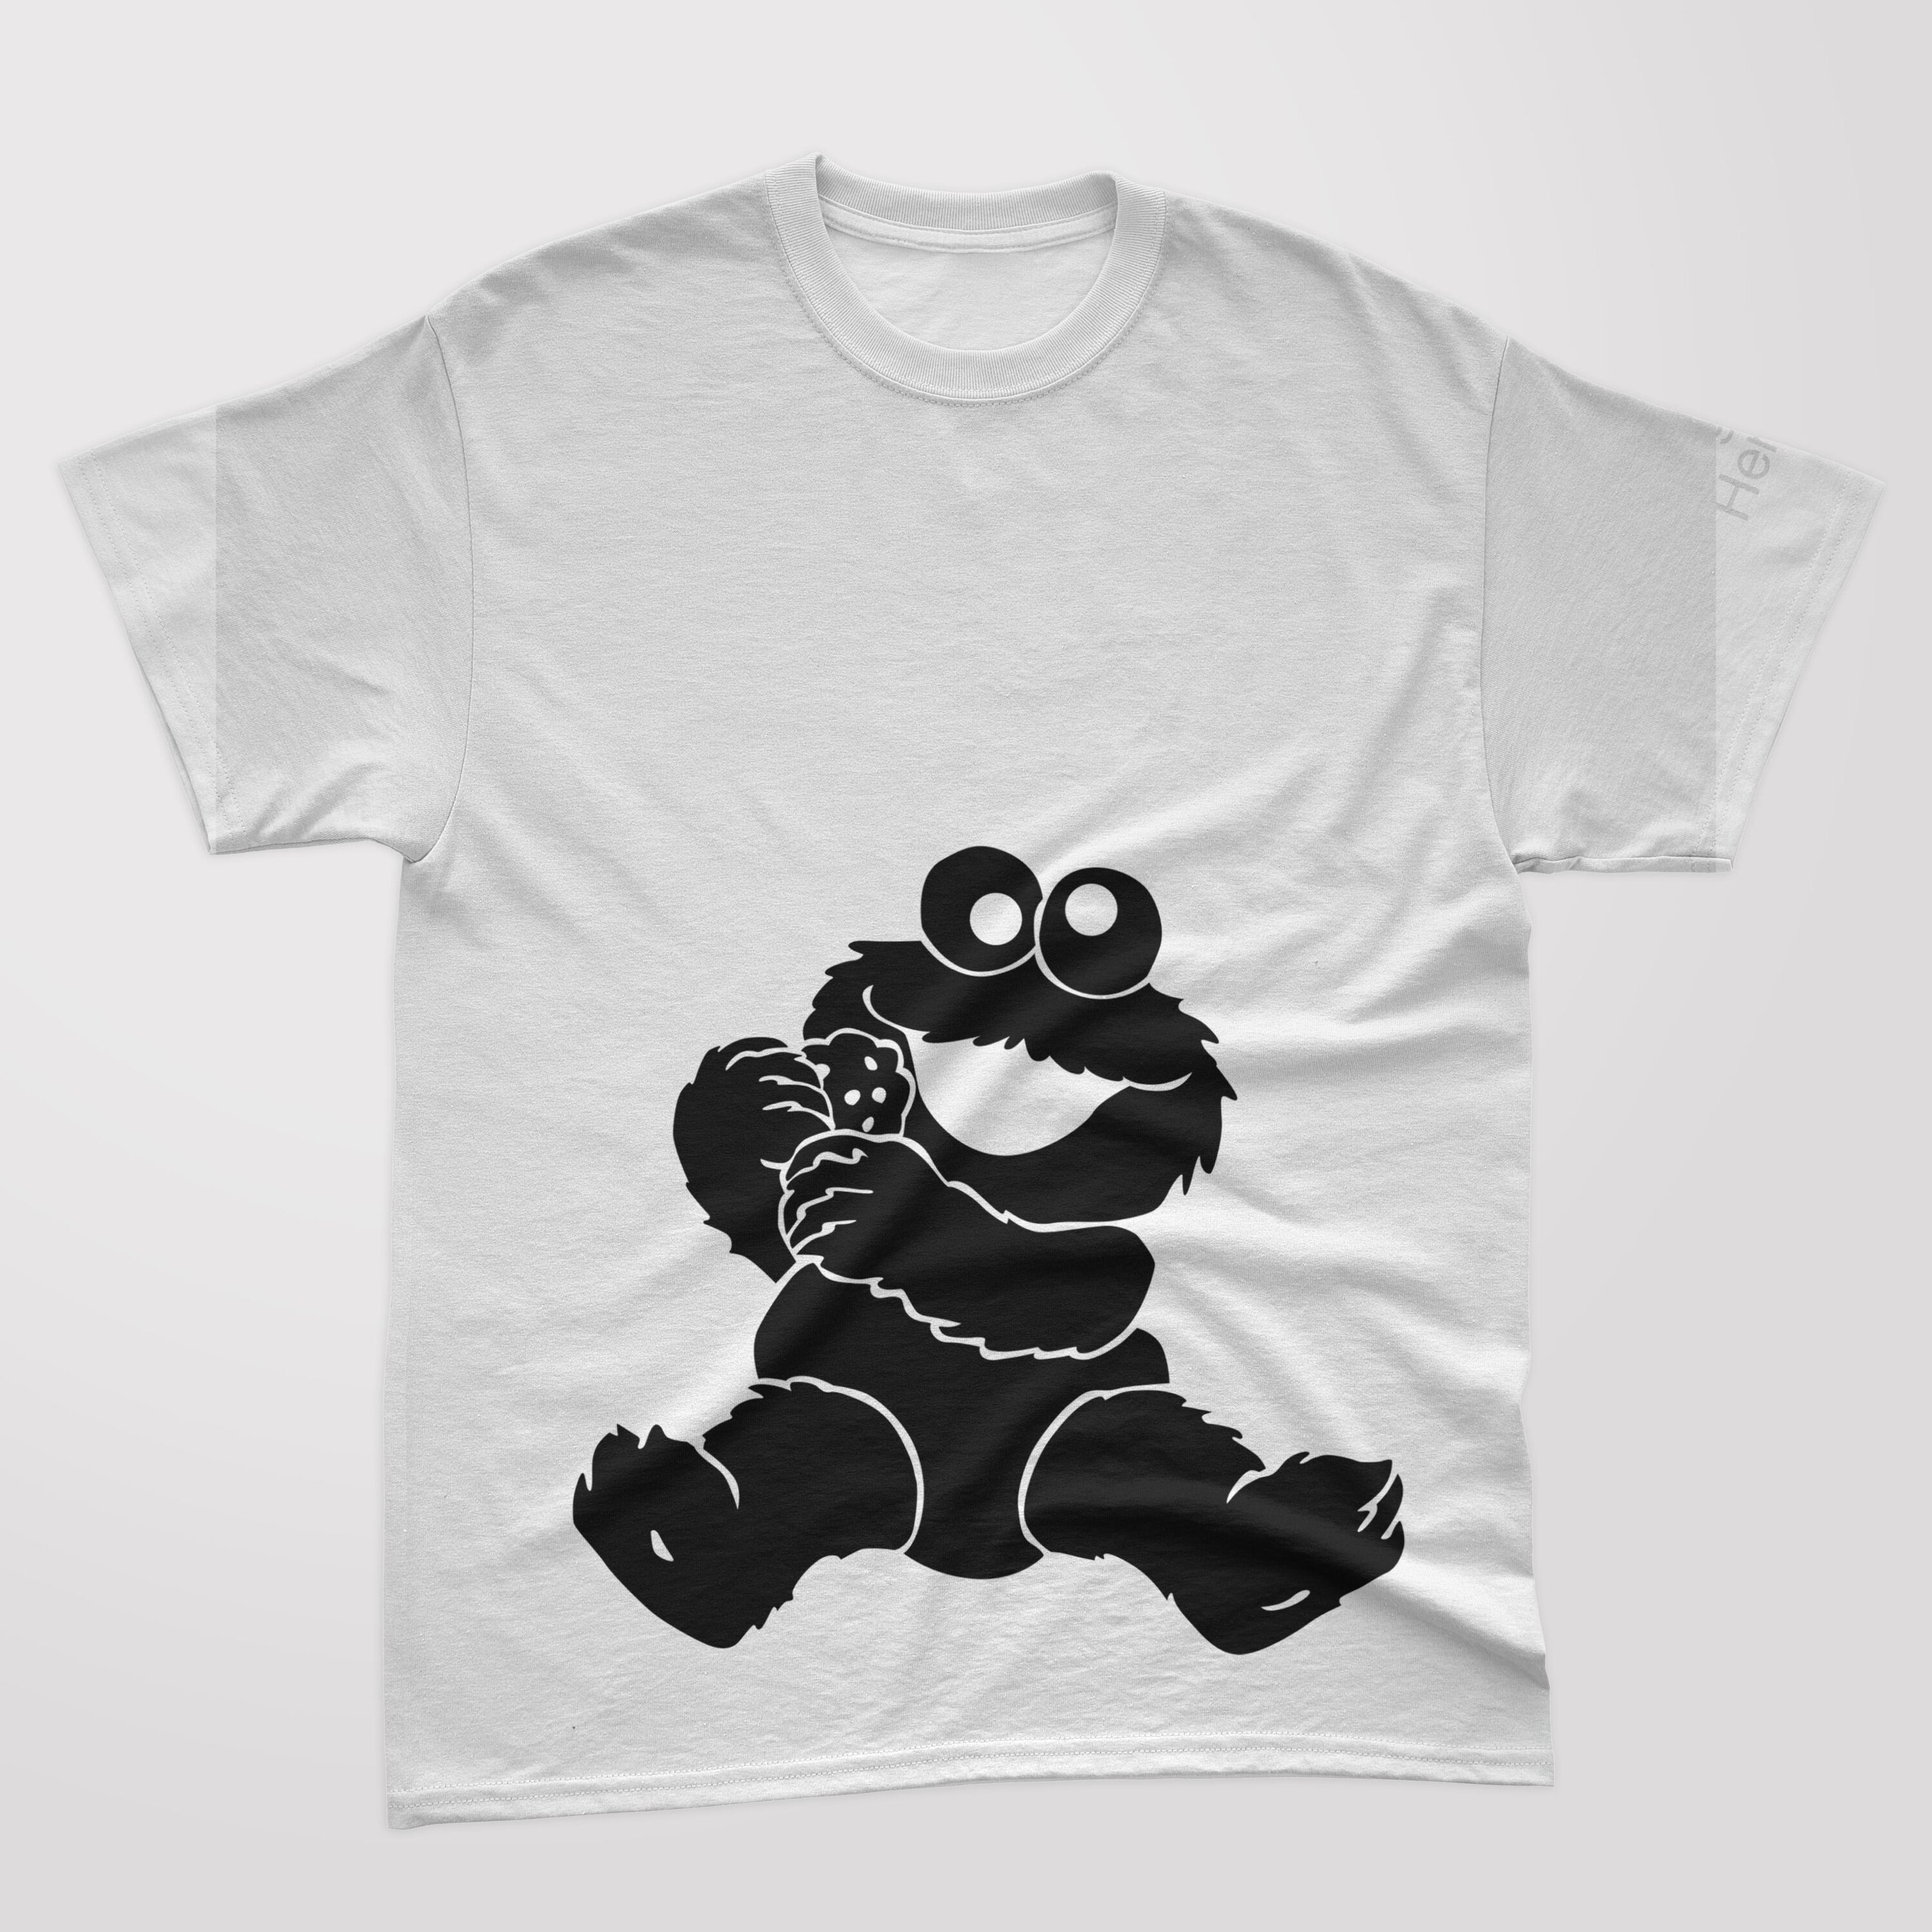 A white t-shirt with a black silhouette baby cookie monster, holding a cookie.